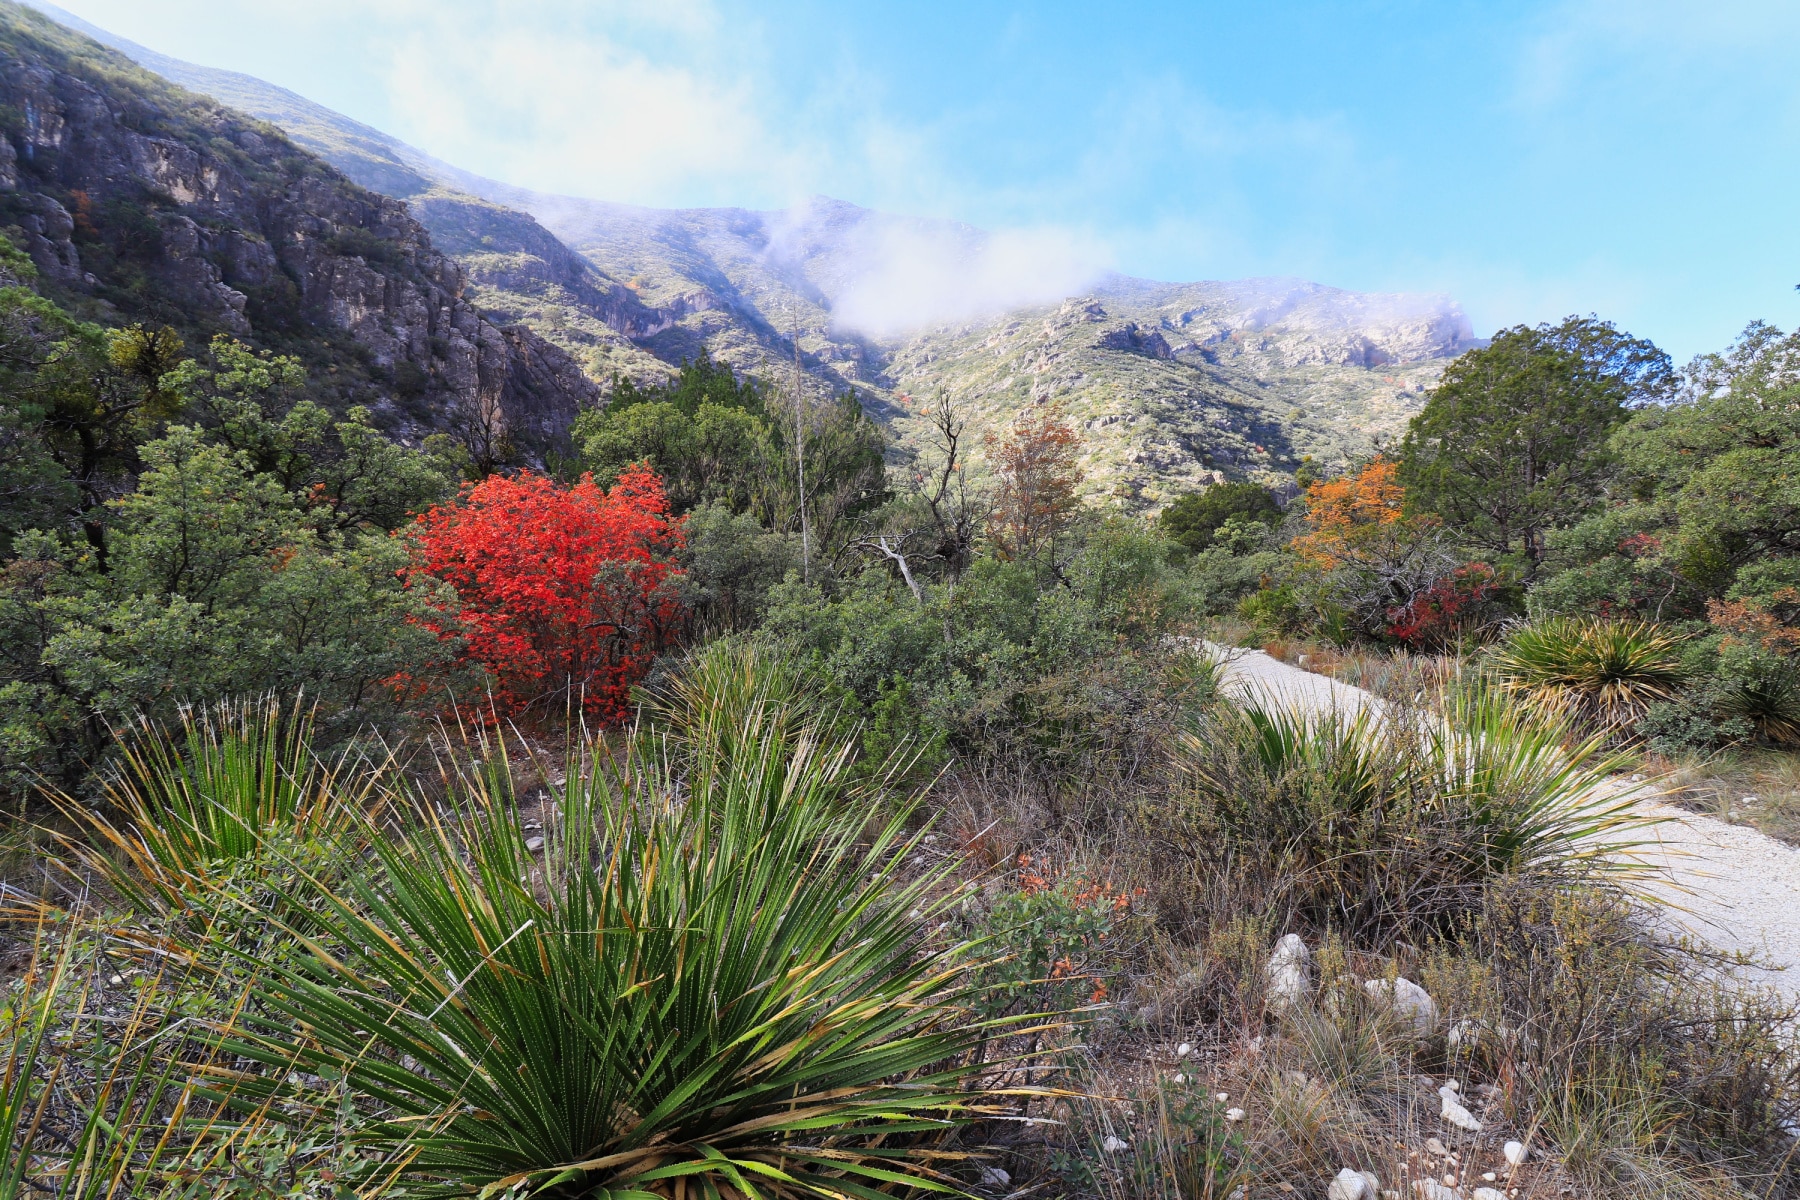 McKittrick Canyon is one of the best Guadalupe Mounains National Park hikes for it's stunning colors among the desert landscape, as seen here. 